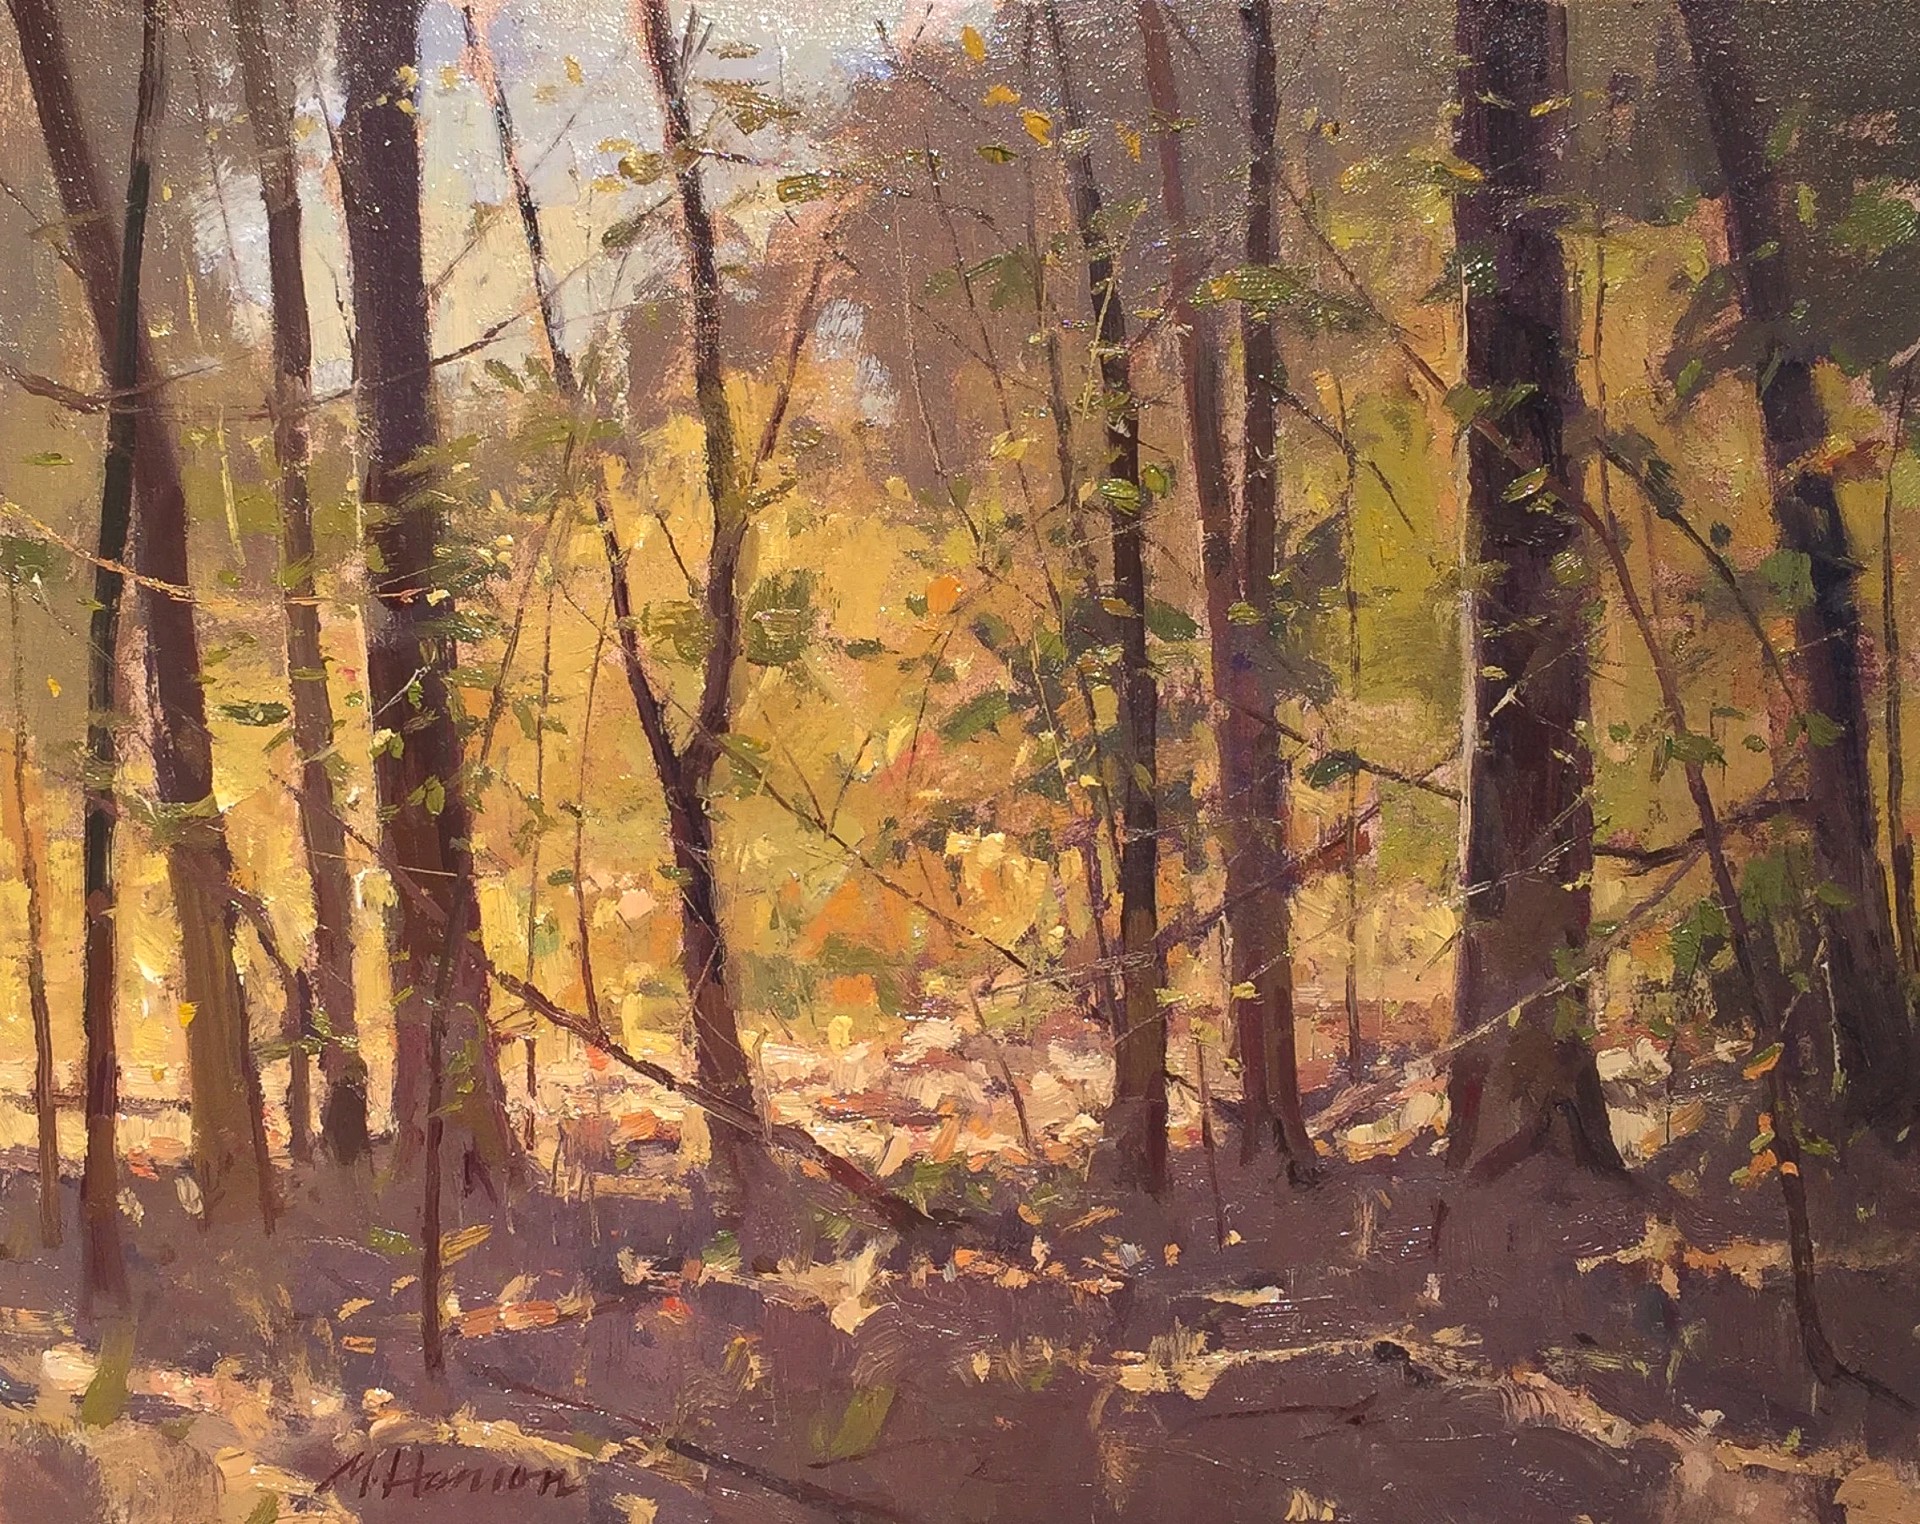 October Passing by Marc R. Hanson, OPAM